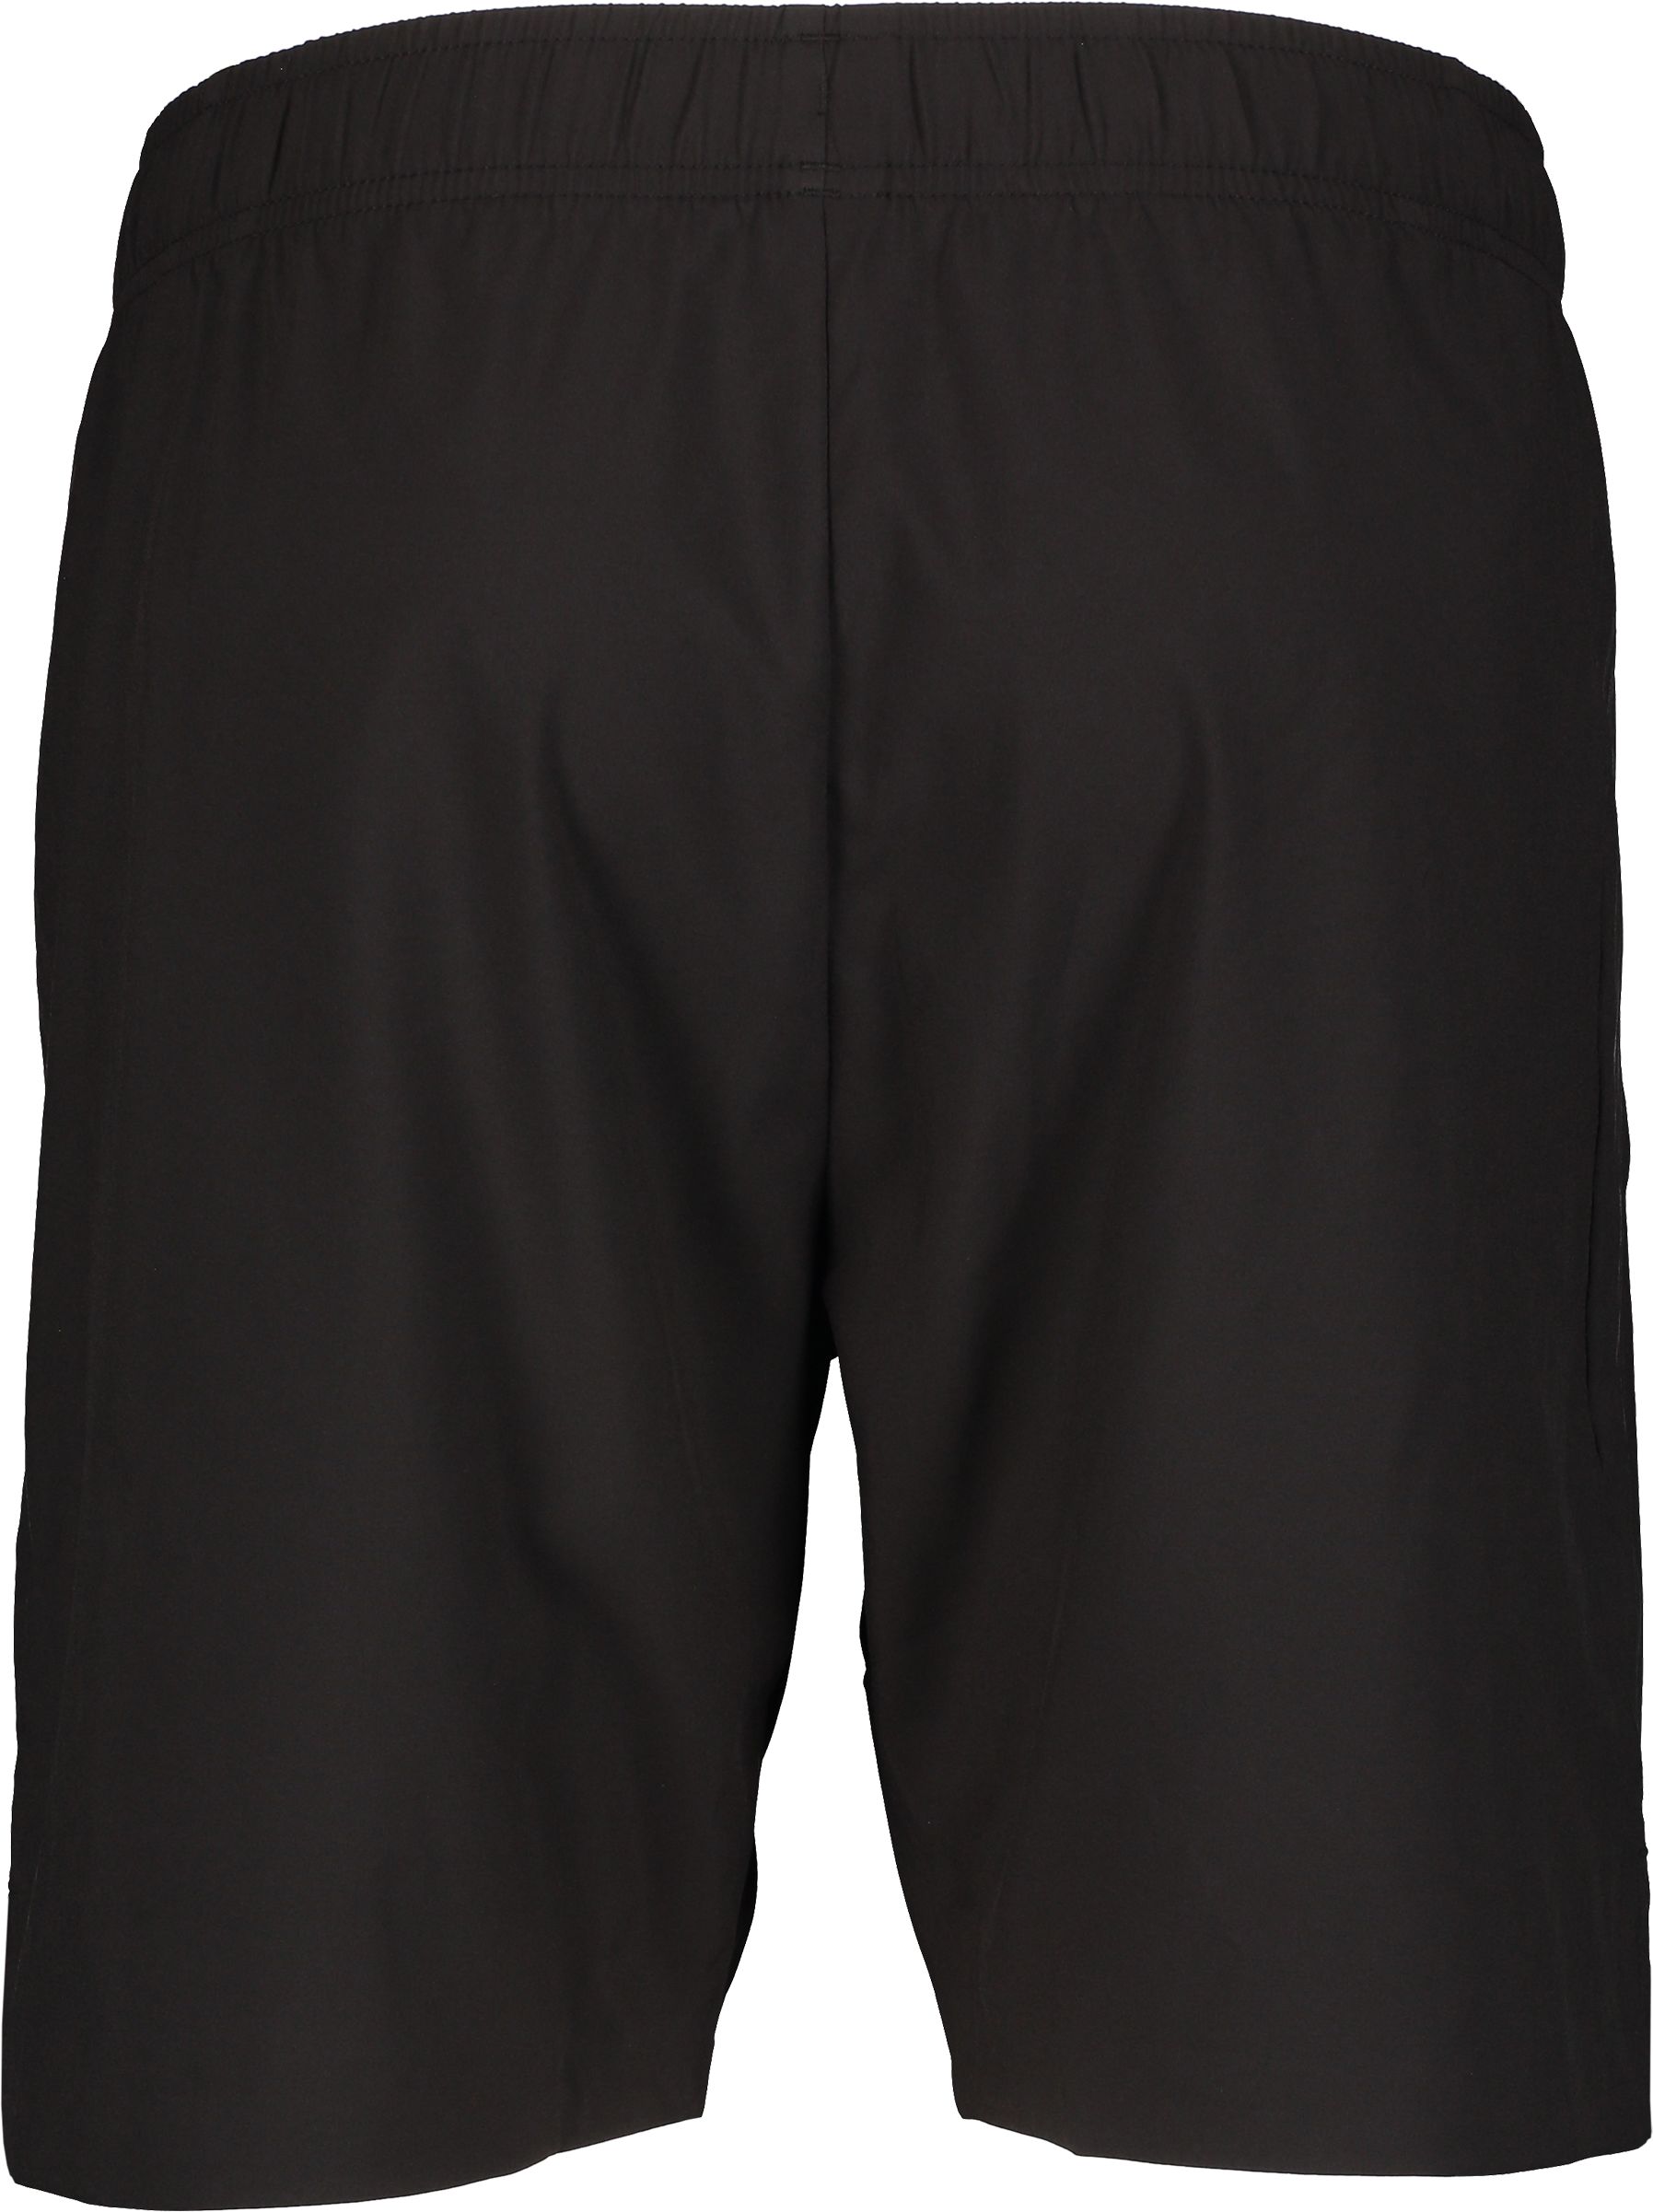 RS, M PERFORMANCE SHORTS